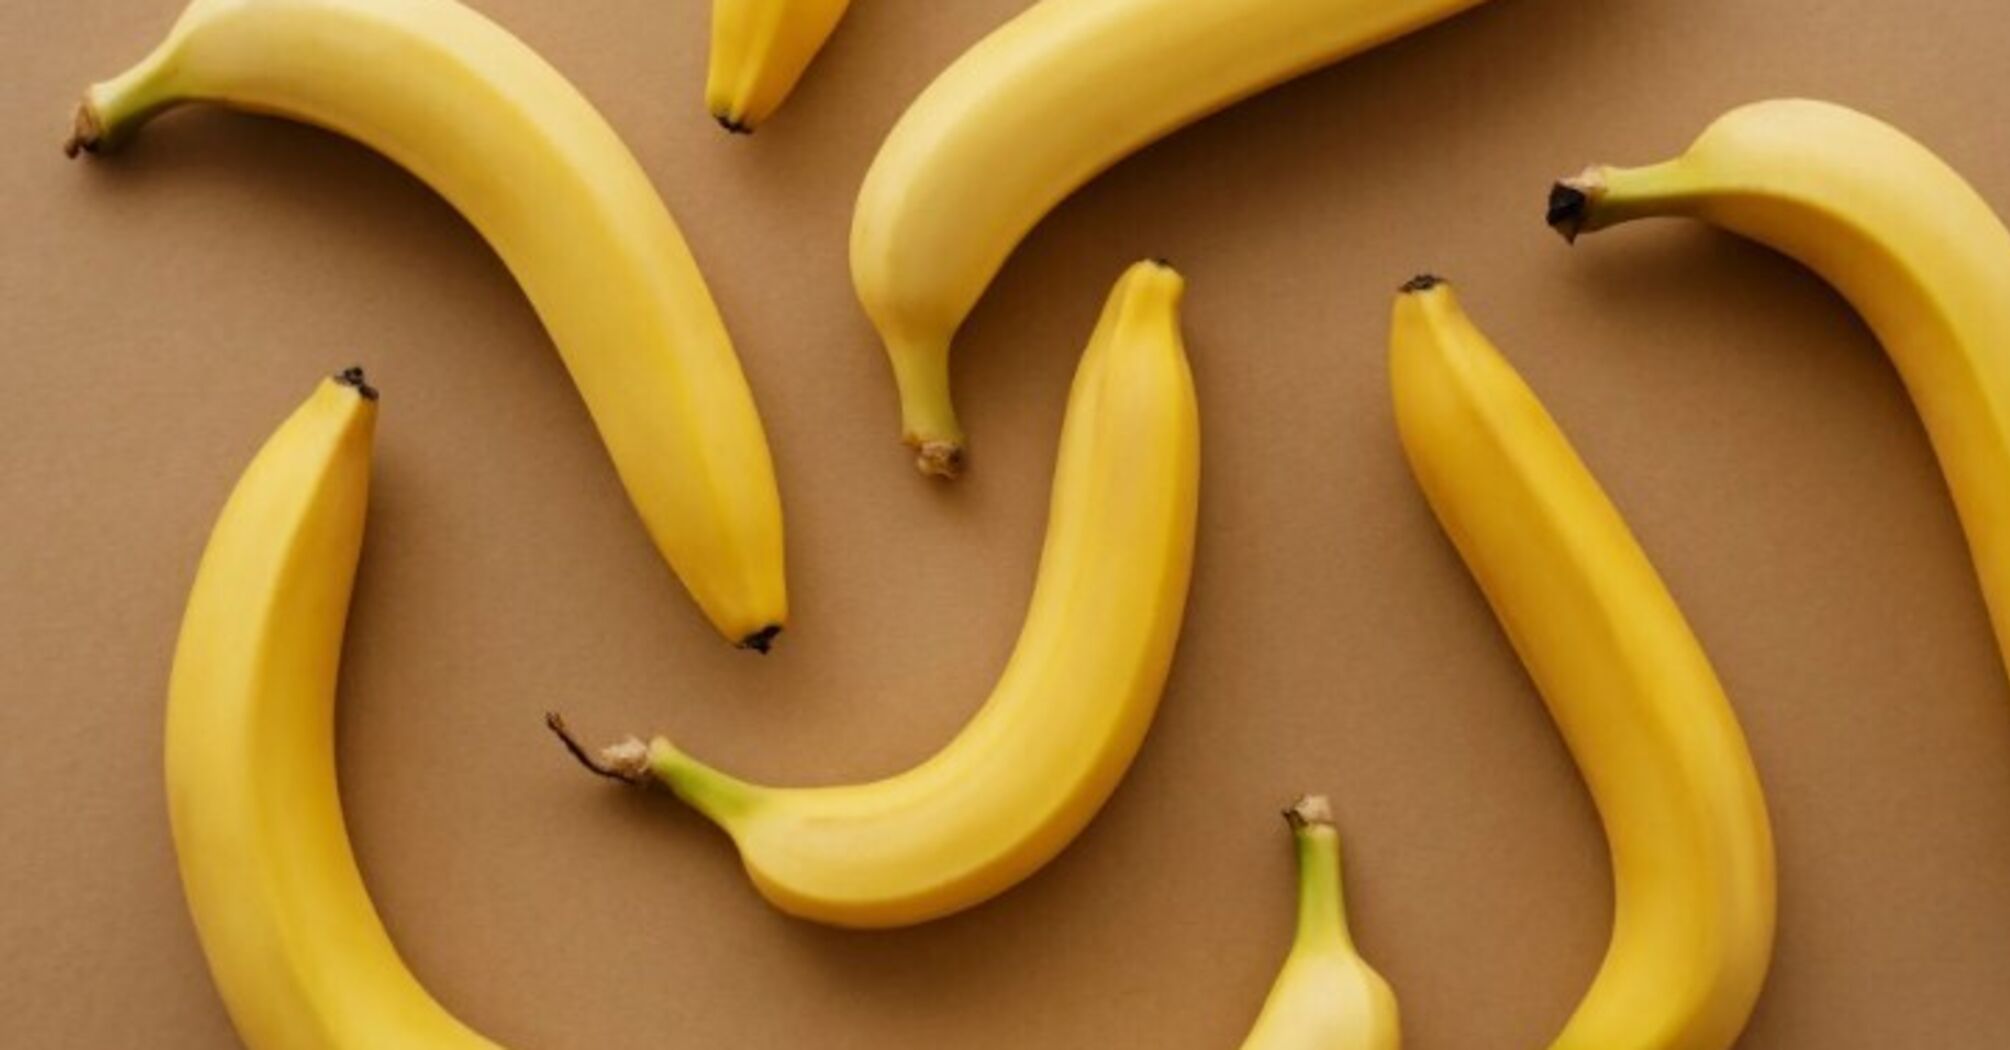 How to store bananas at home